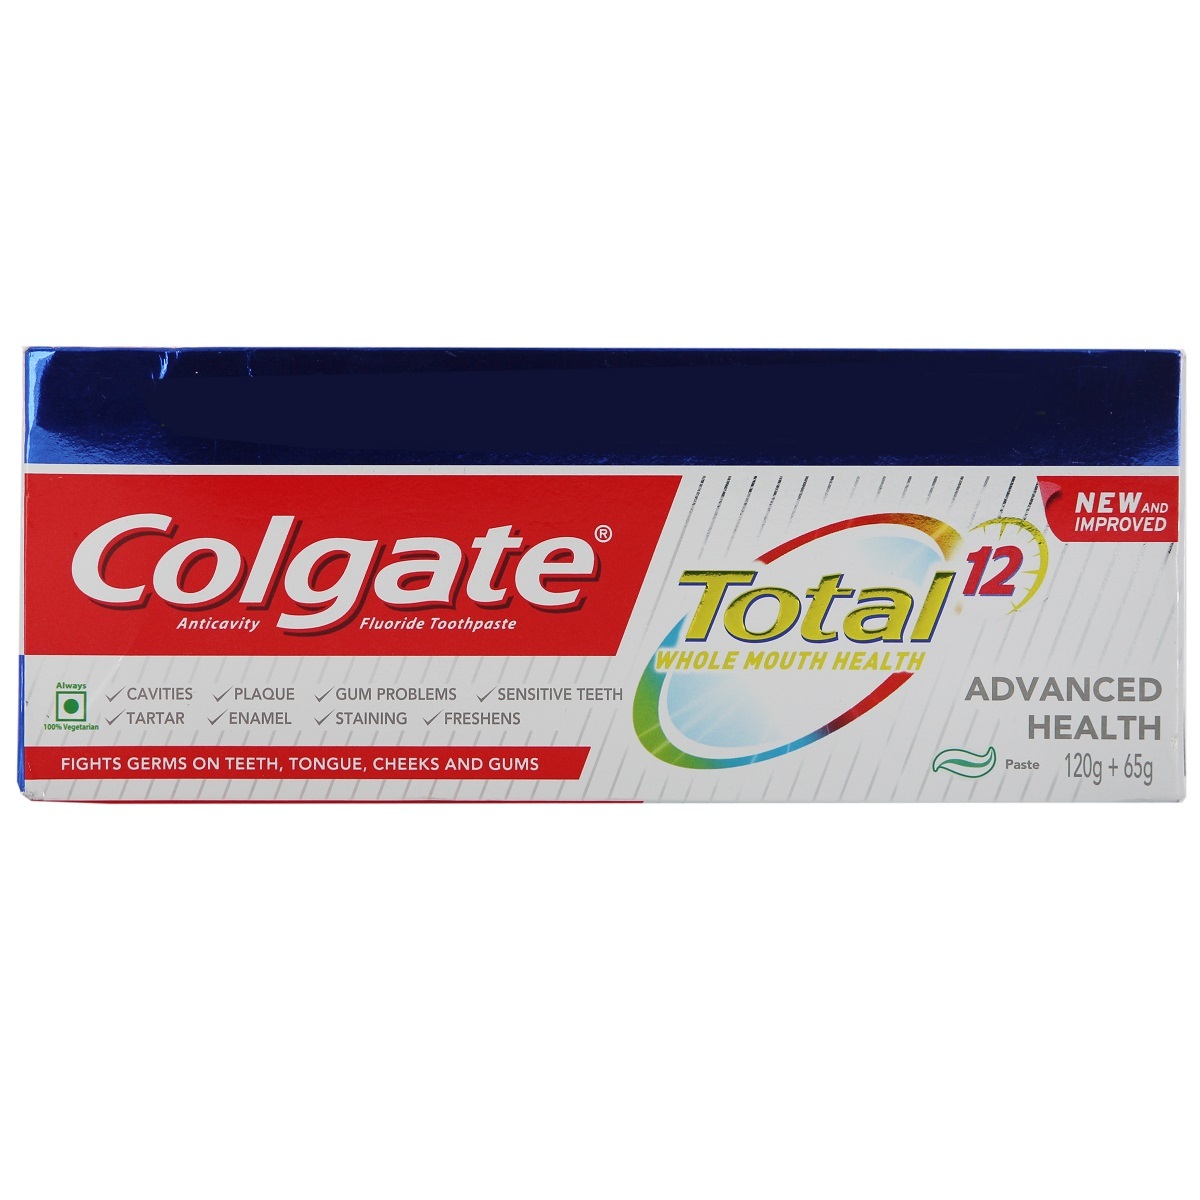 Colgate Tooth Paste Total Advanced Health 120g + 65g Free